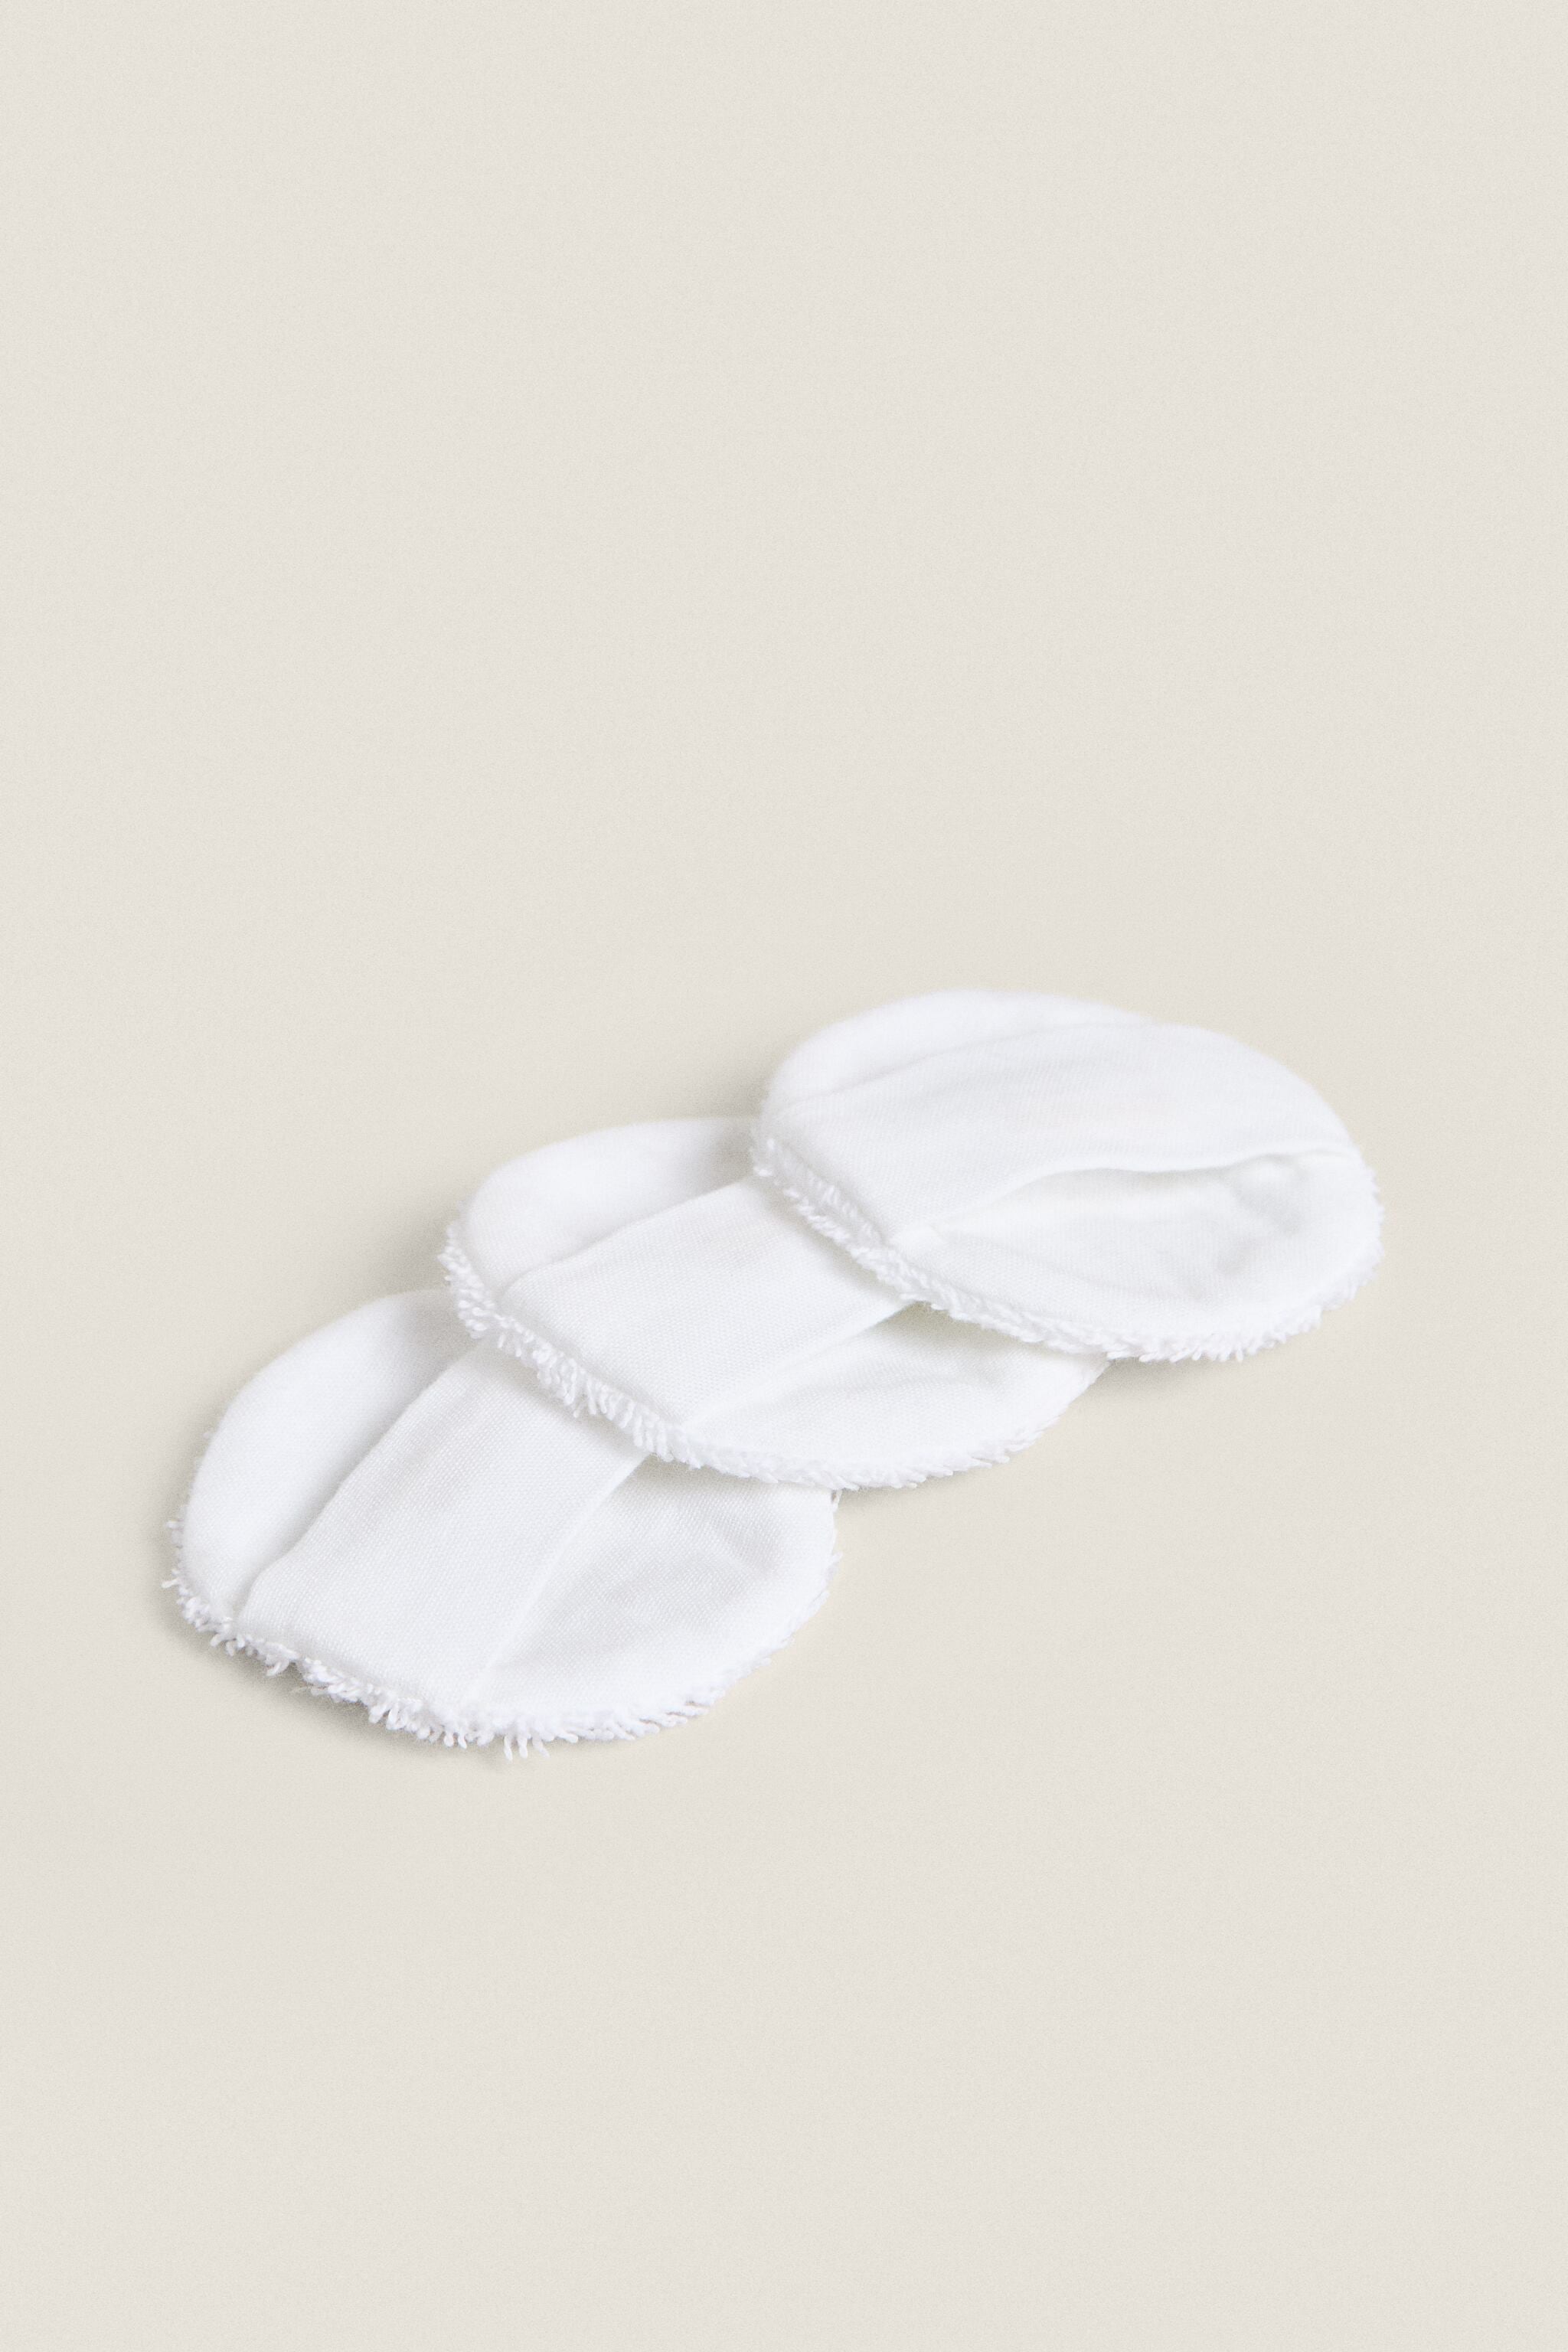 PACK OF REUSABLE COTTON MAKEUP-REMOVAL PADS (PACK OF 3)